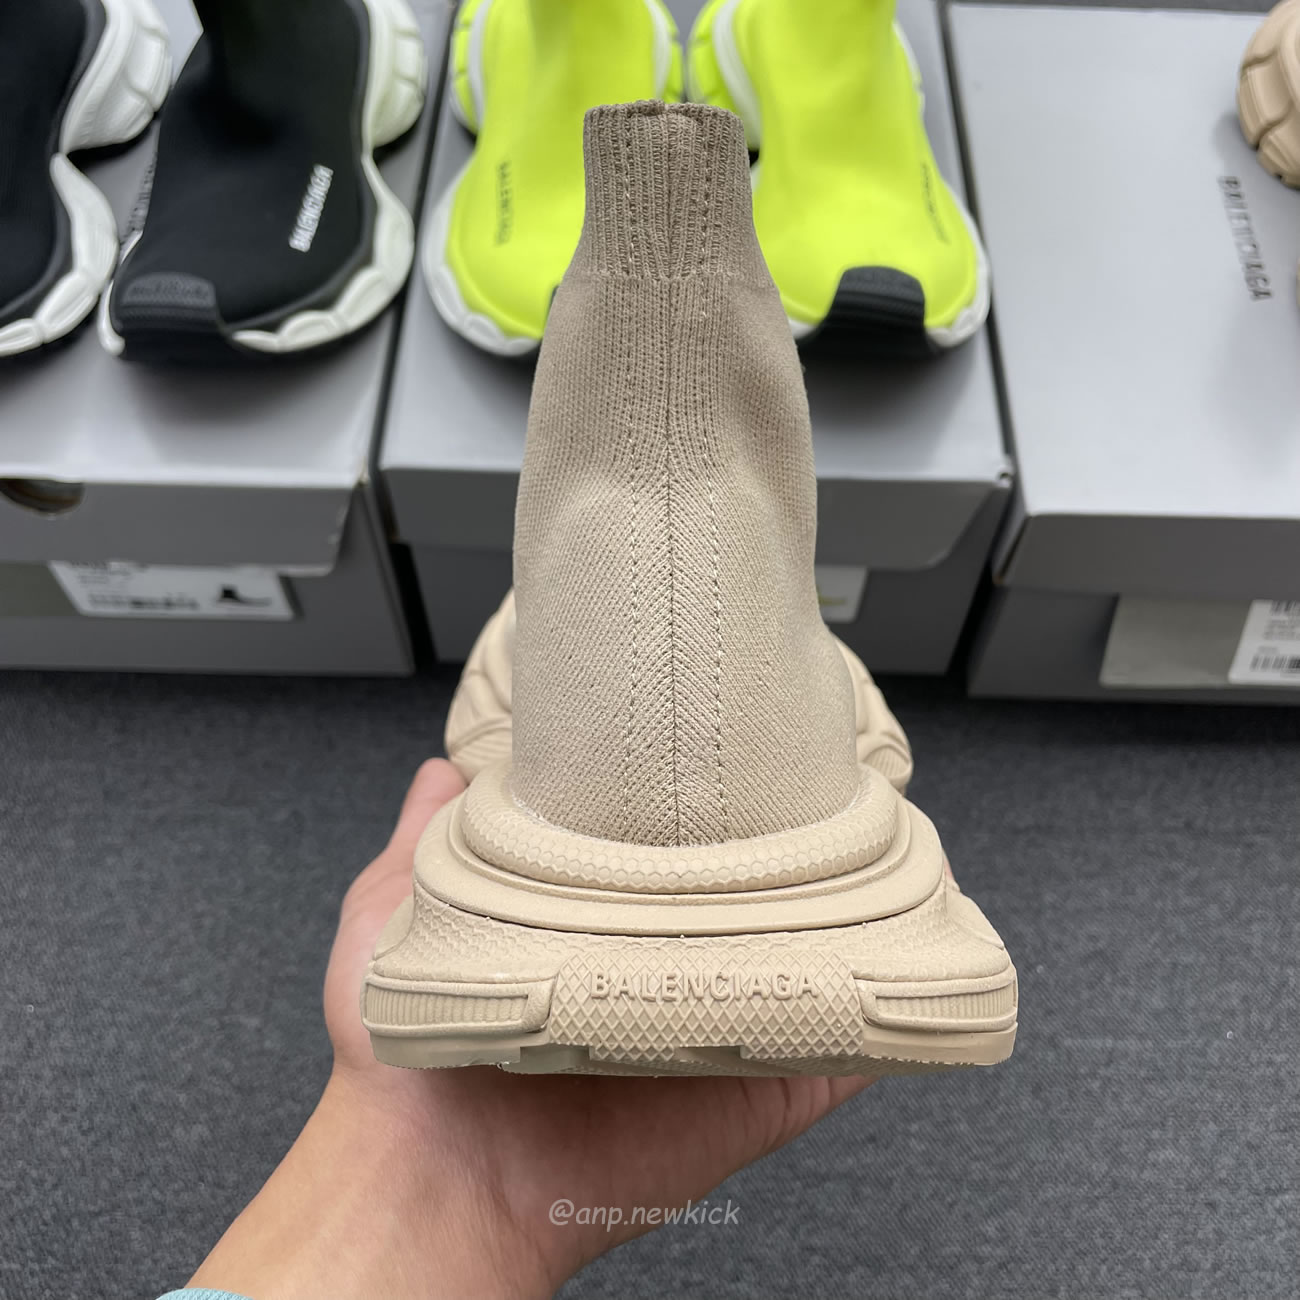 Balenciaga 3xl Sock Recycled Knit Sneakers Black White Fluo Yellow Beige (10) - newkick.org